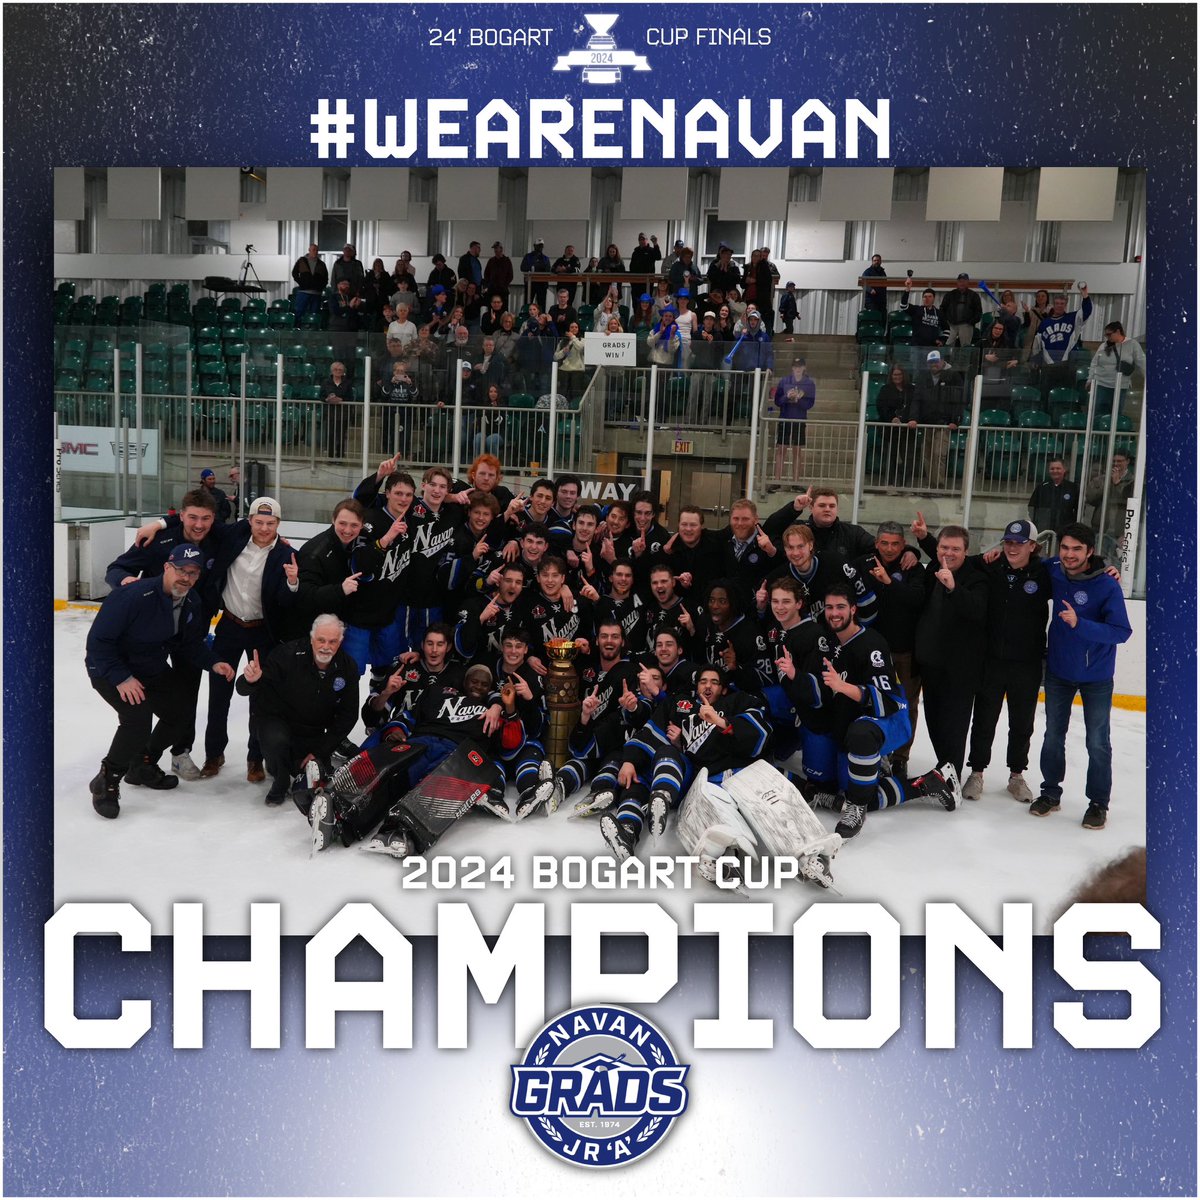 Your Navan Grads are the 2024 Bogart Cup Champions!! With a huge win in Game 6 against the Bears, the grads punch their first bogart cup, and a ticket to the 2024 Centennial Cup, we’ll see you in Oakville!! #champions #cchl #cjhl #hockey #playoffs #ottawa #navan #smithsfalls